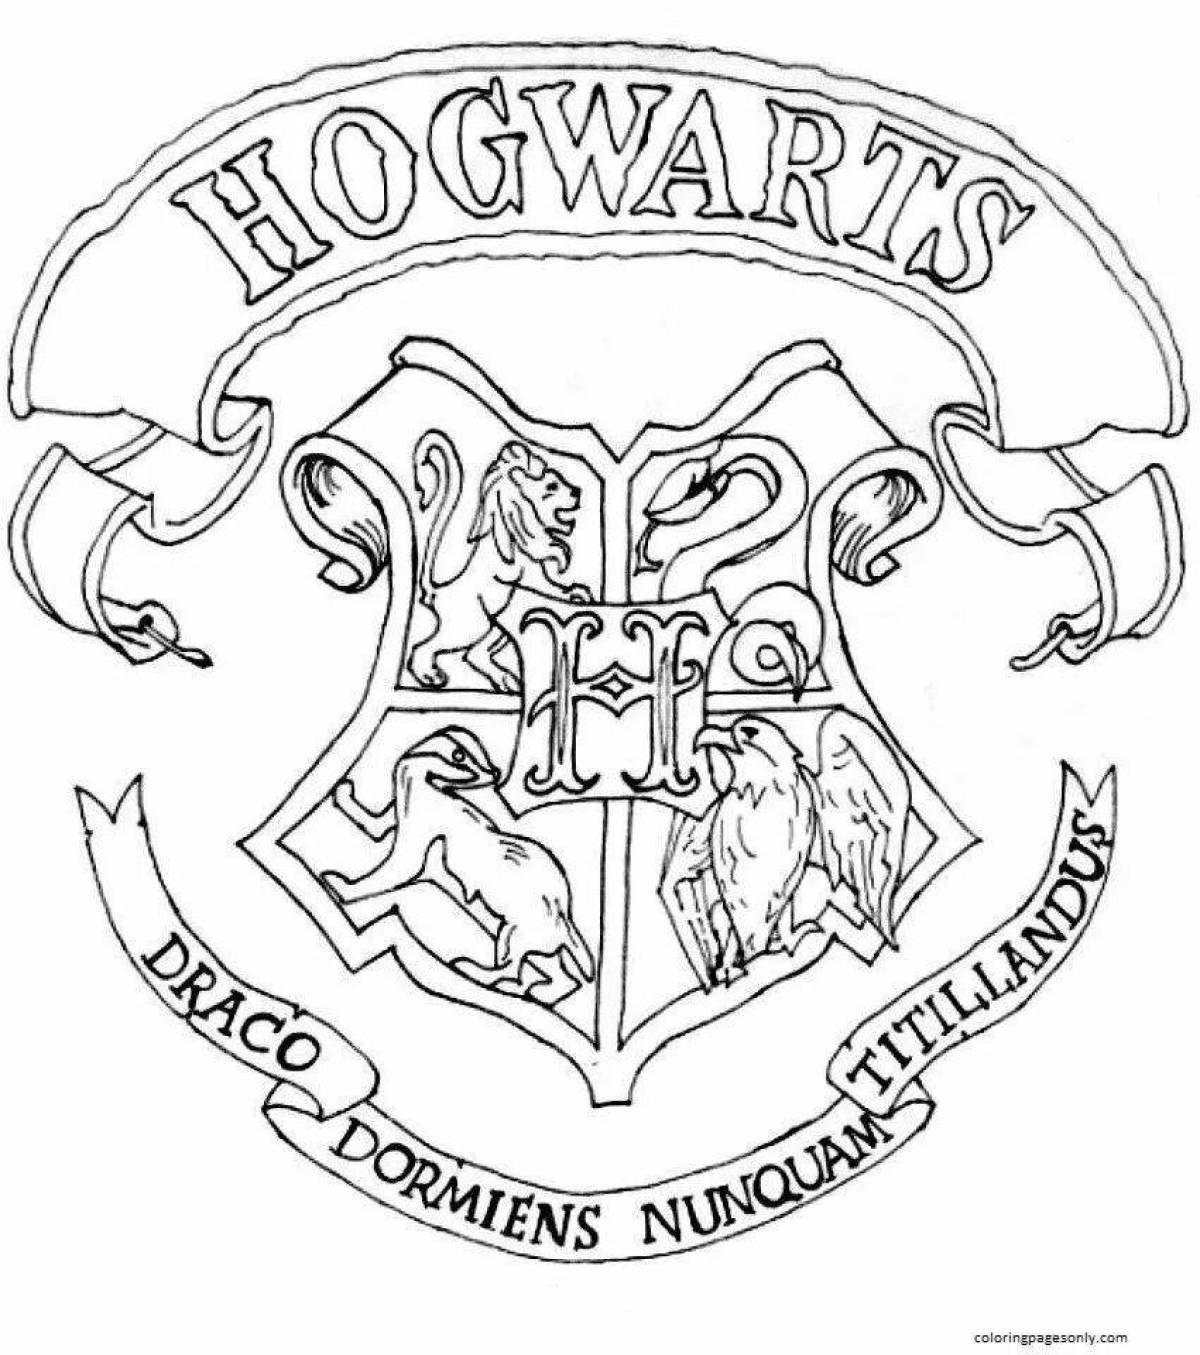 Great Gryffindor coloring page